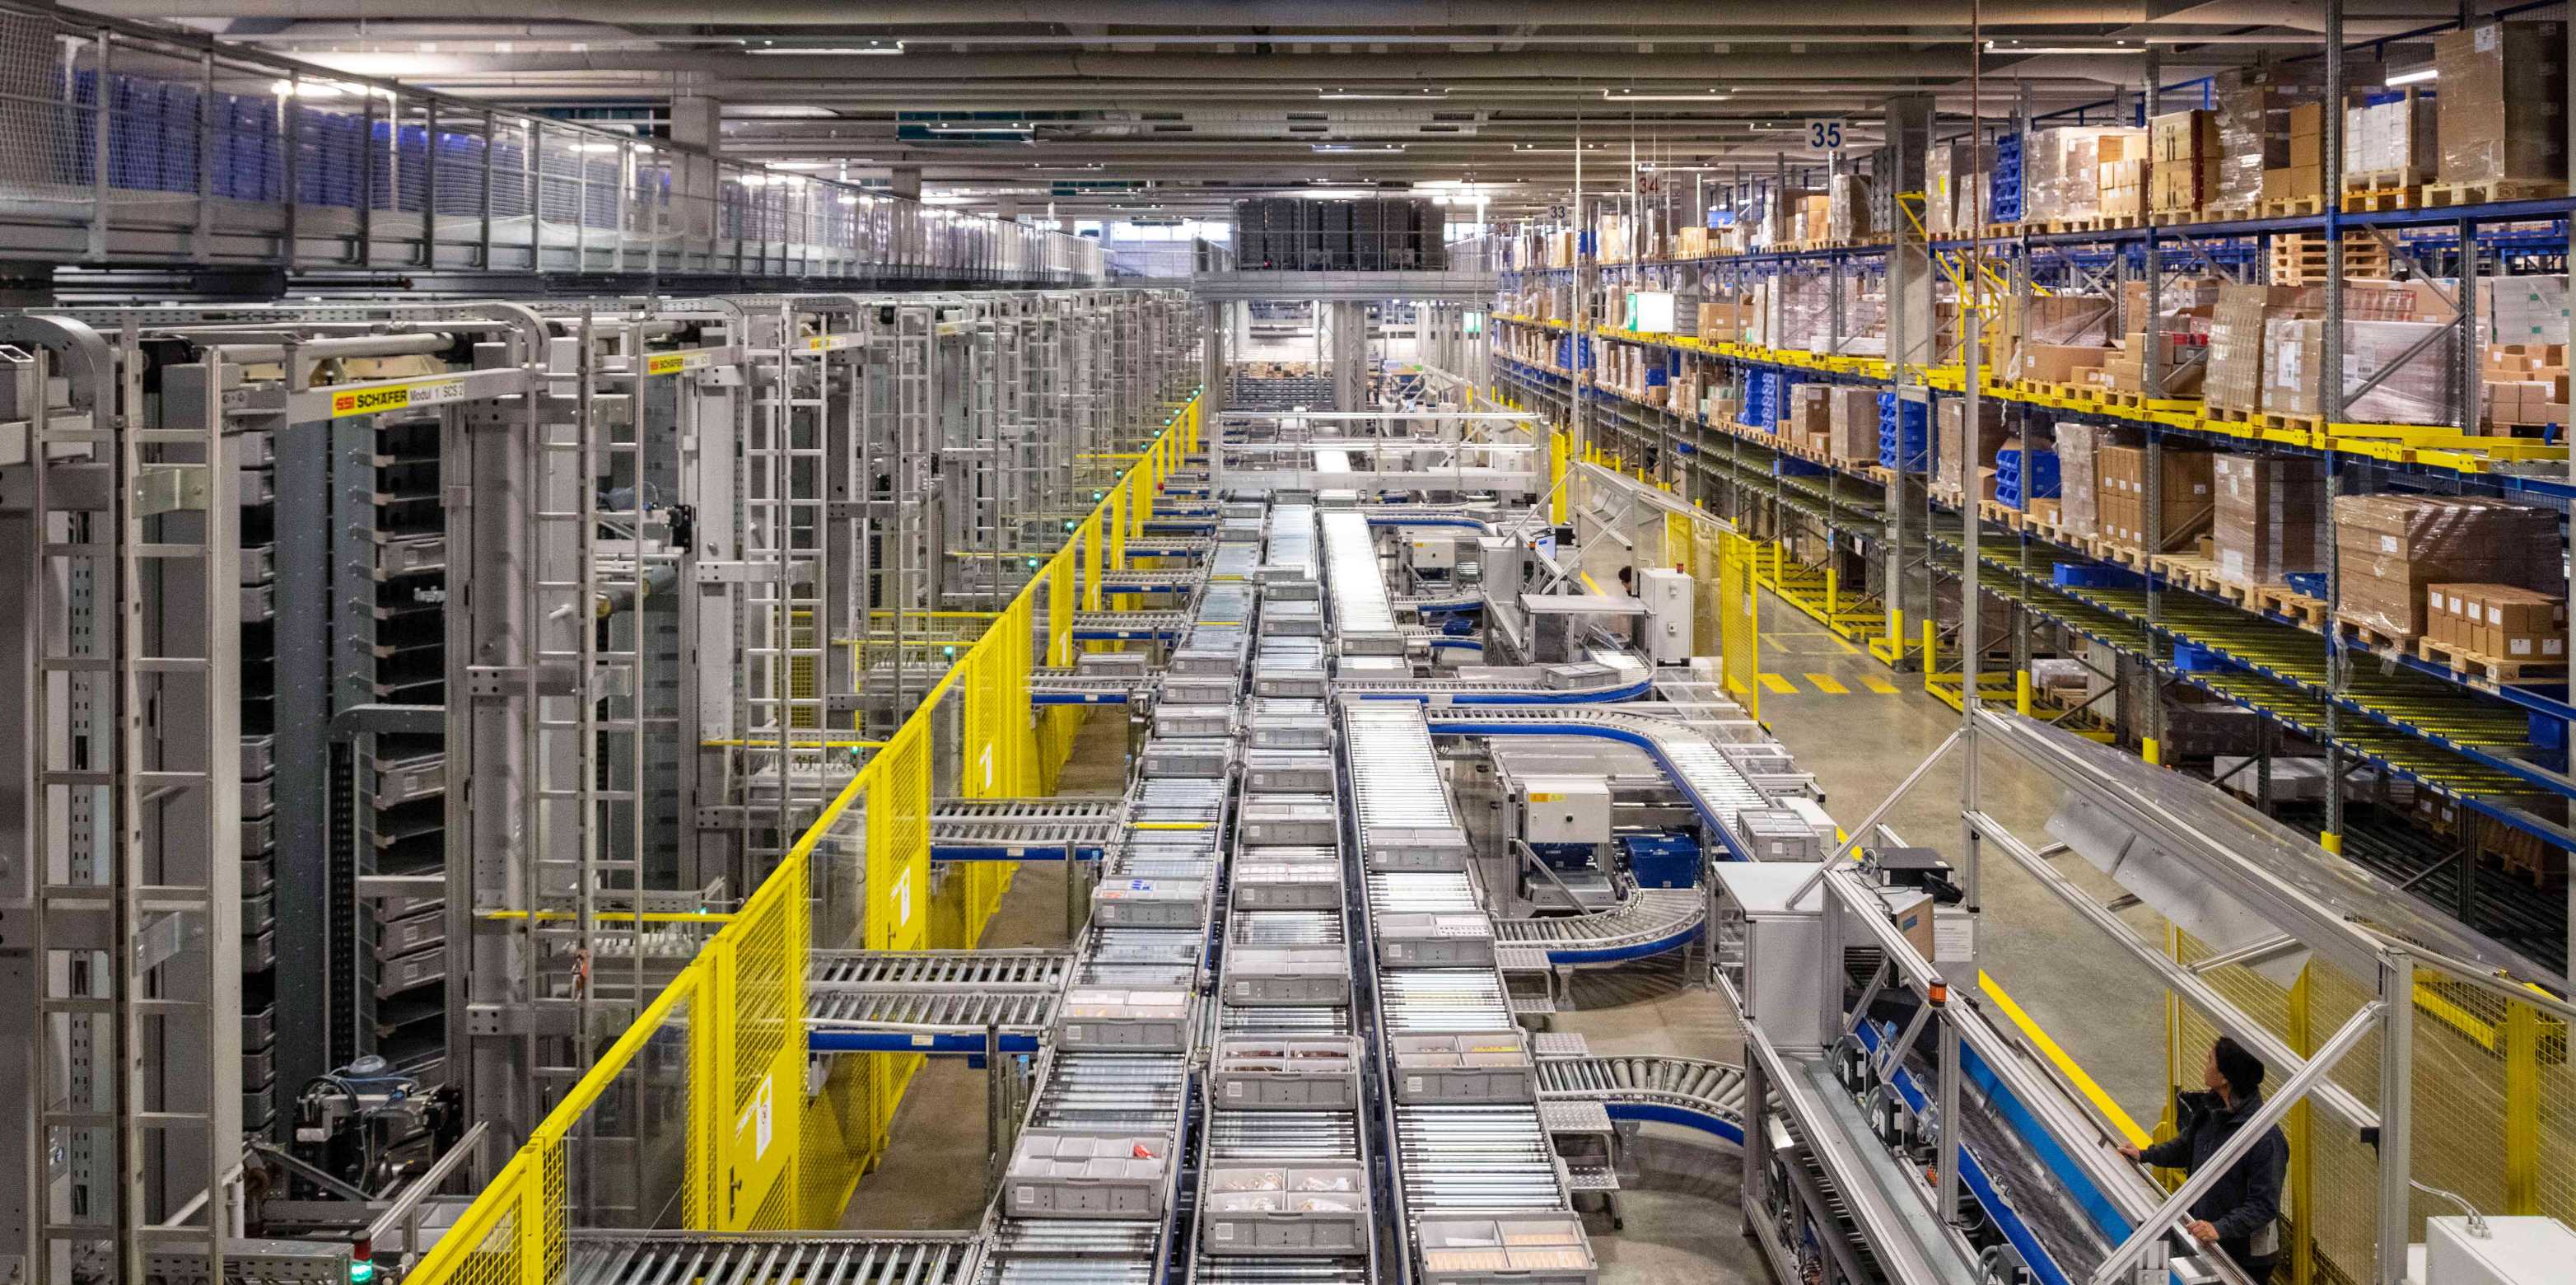 Picture of a distribution center